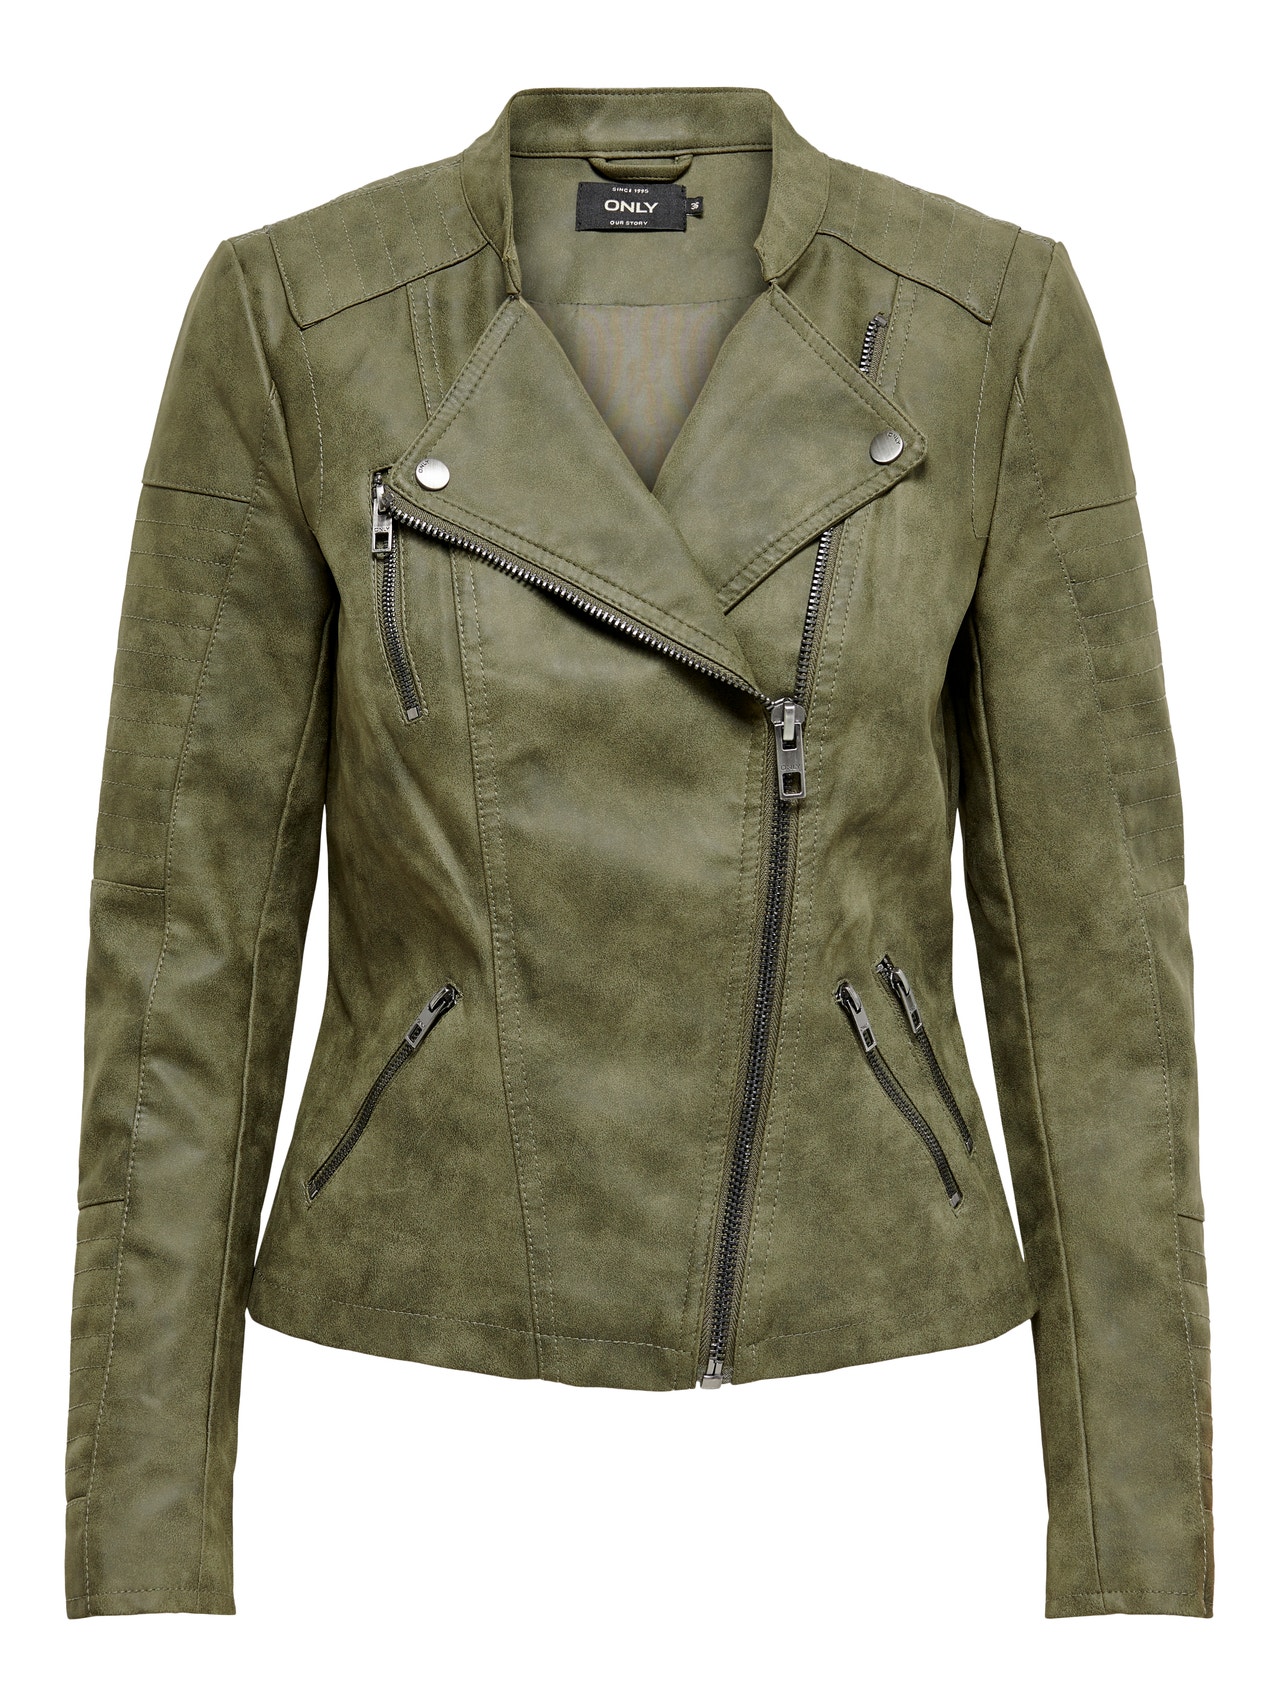 ONLY® Green Leather look Jacket | | Medium